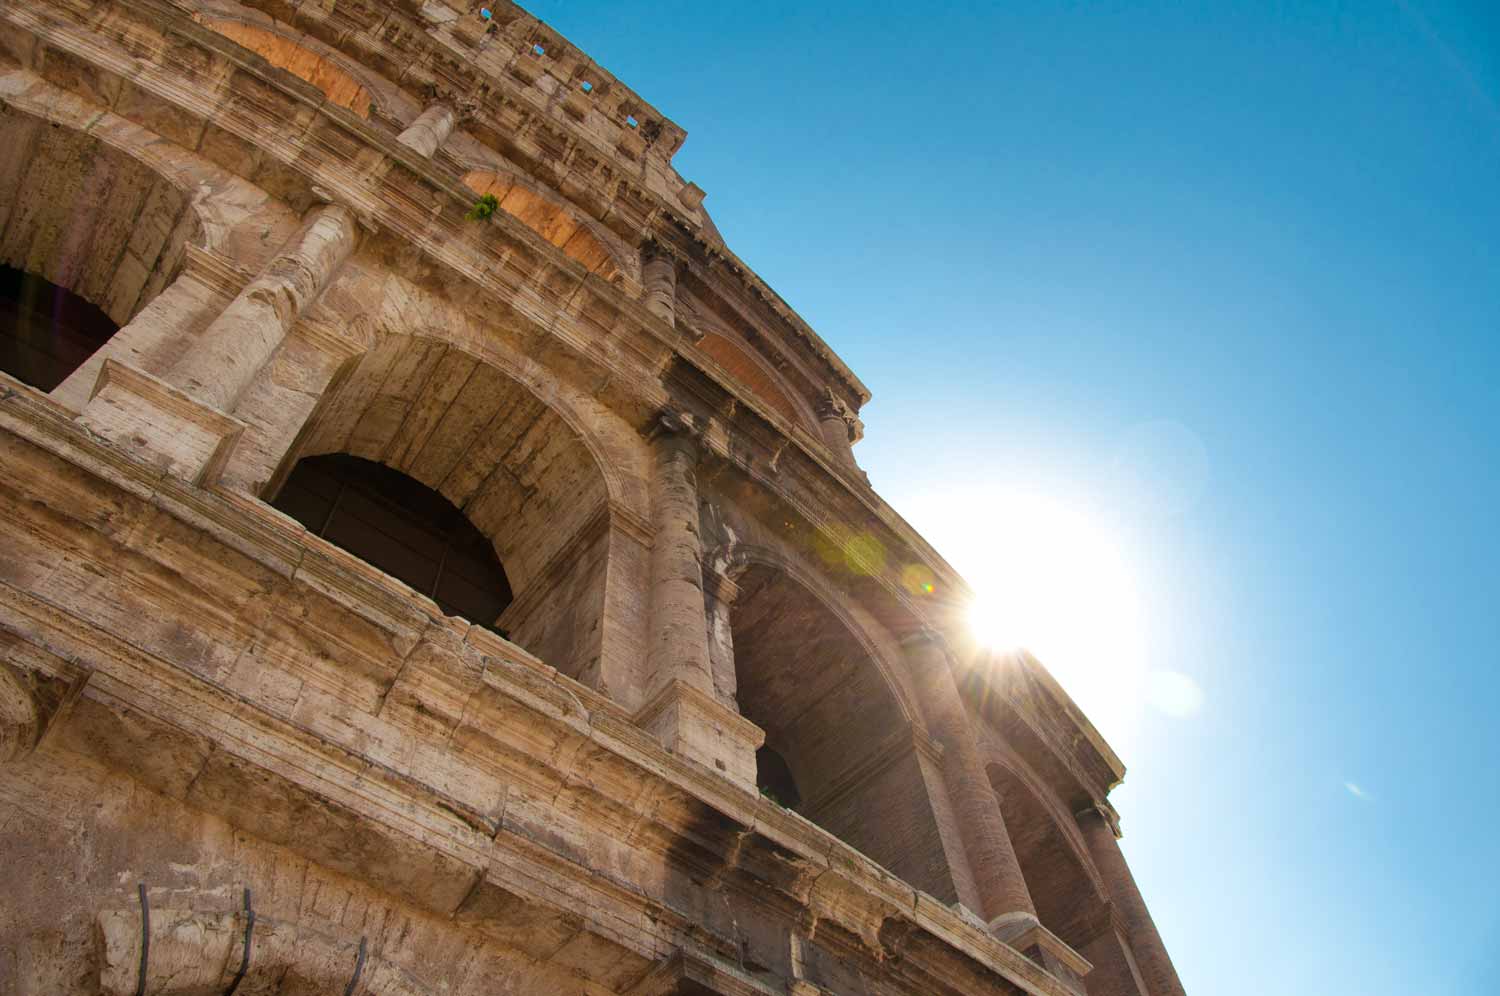 The early morning sun peaks over the Colloseum.